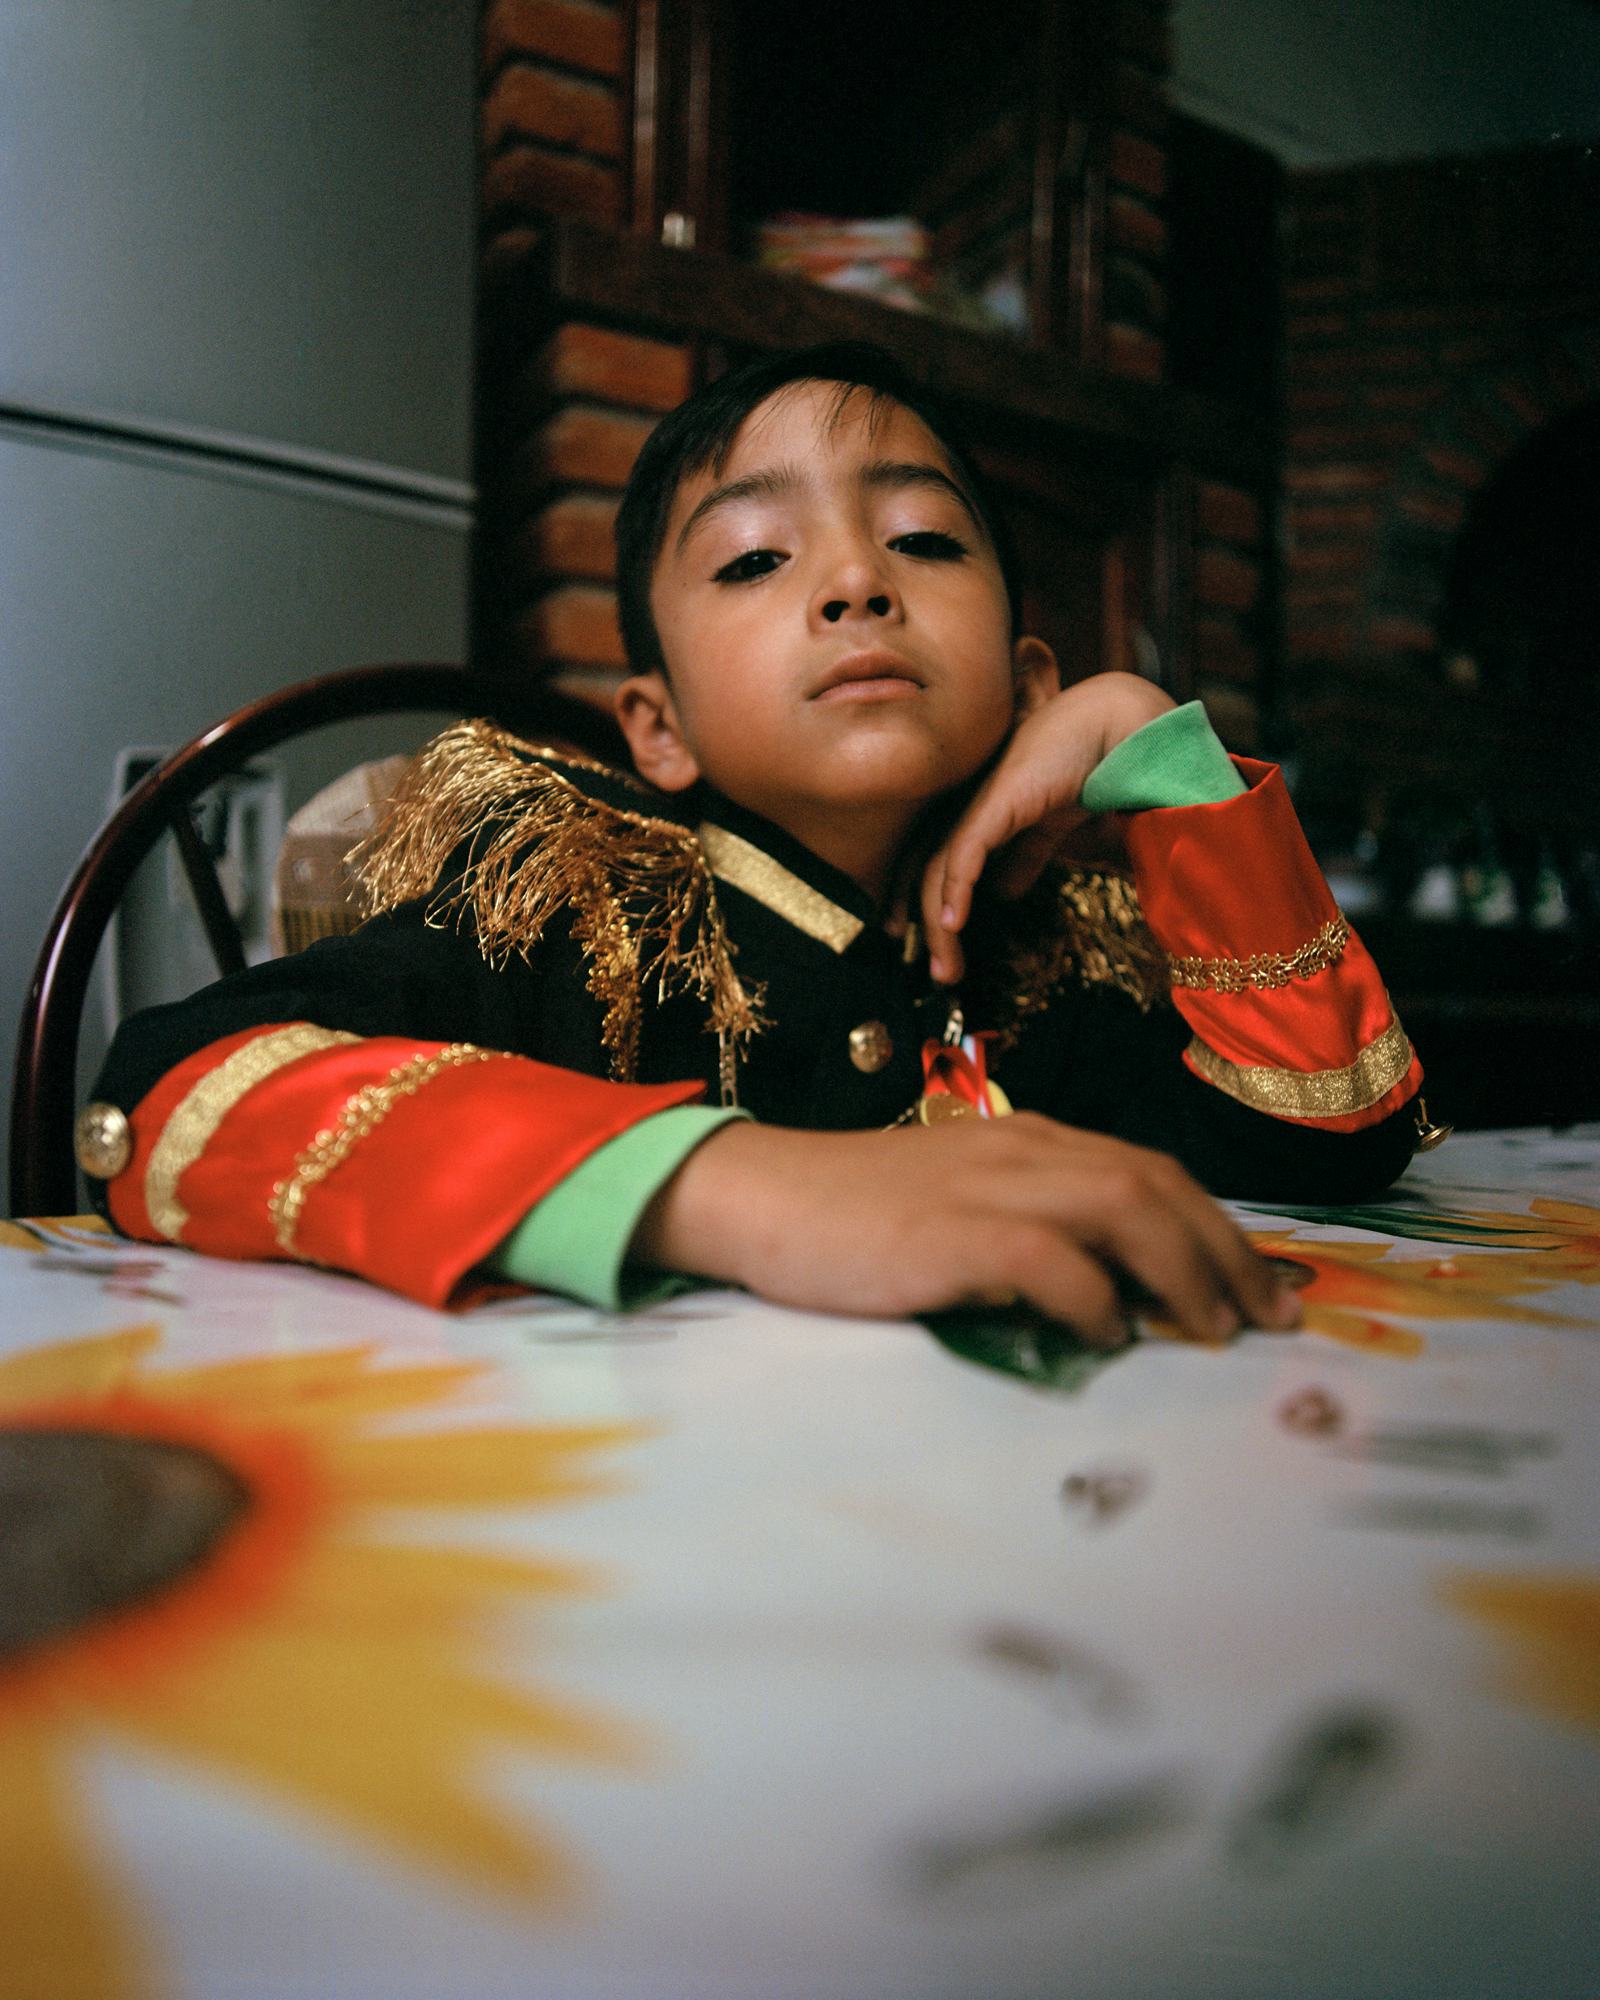 Boy sitting at table looking into the camera